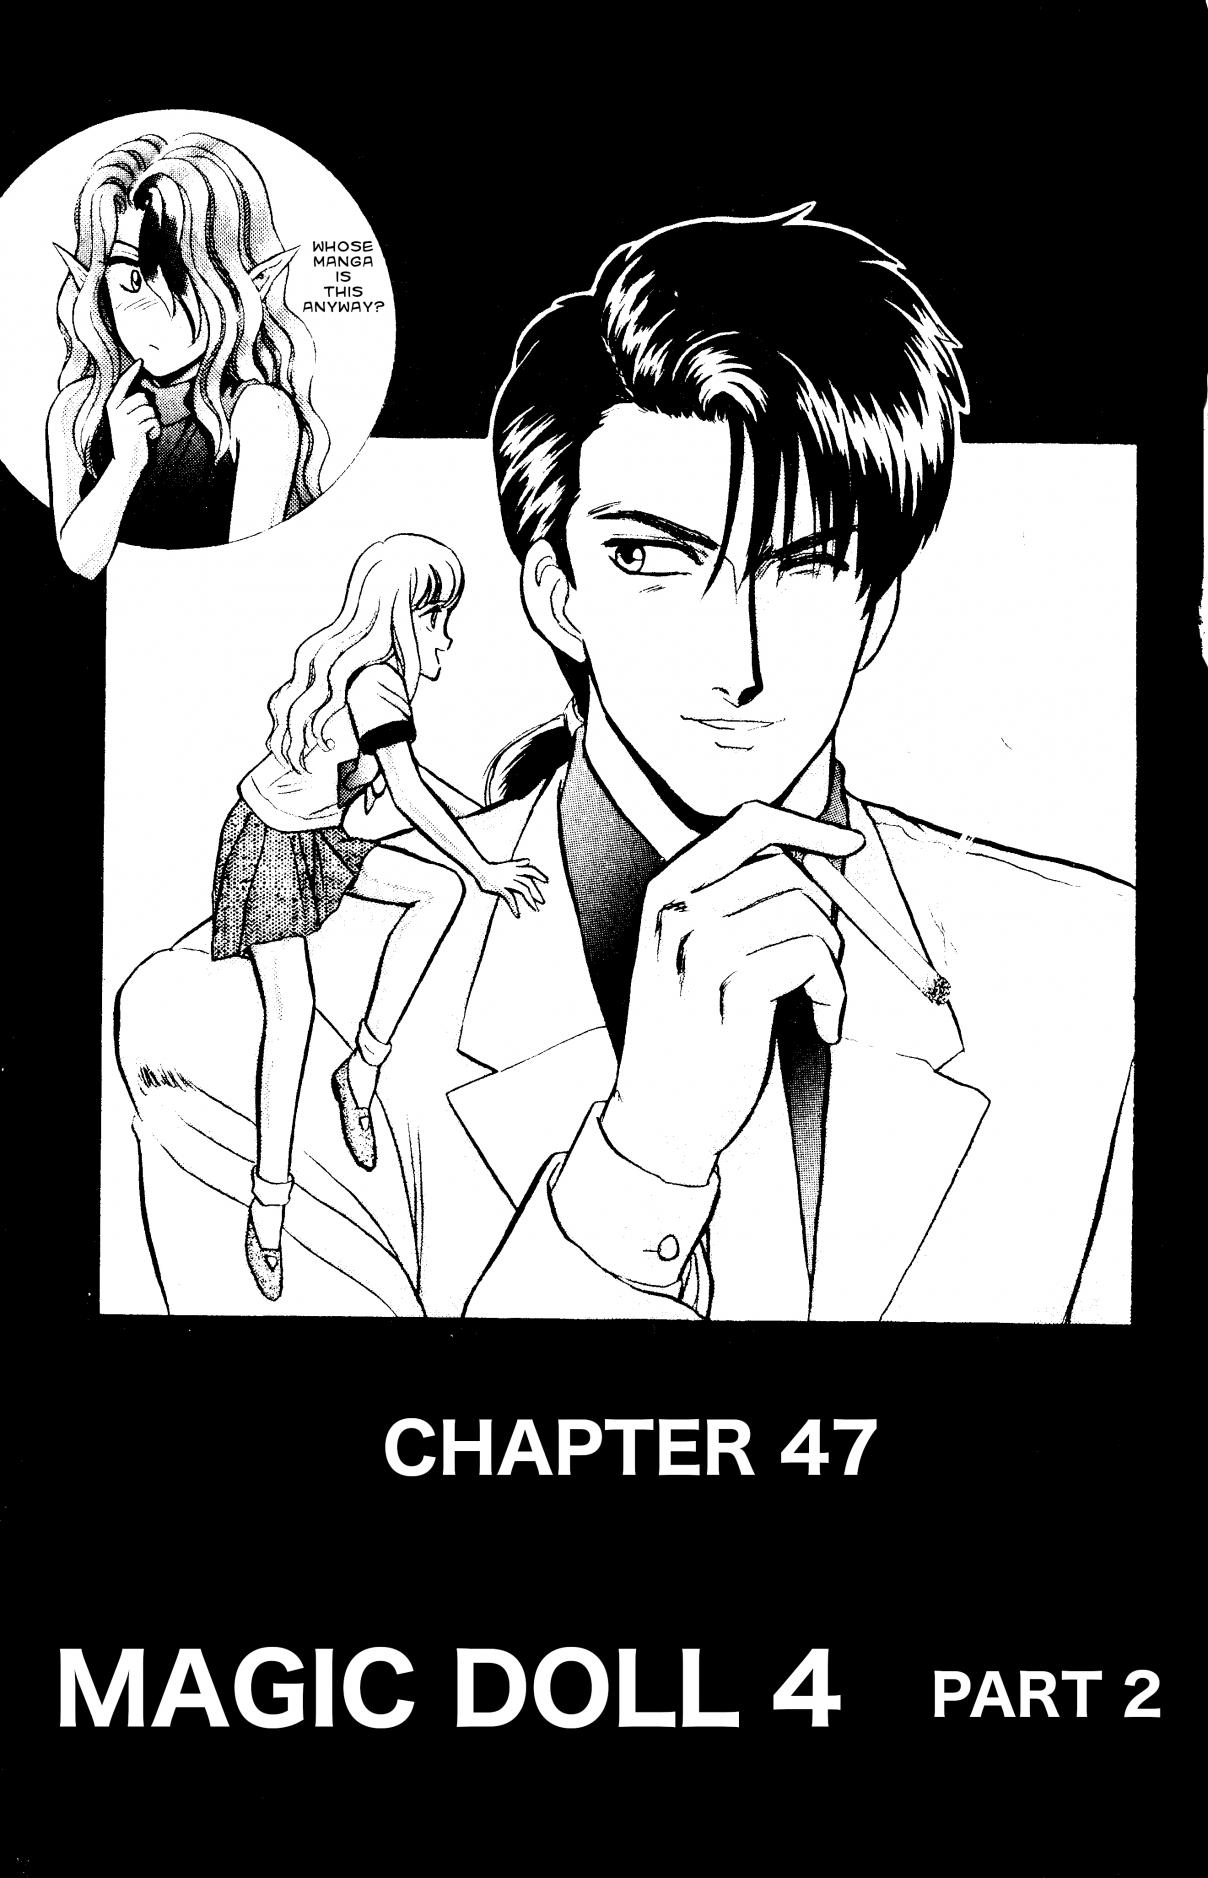 Outer Zone Vol. 7 Ch. 47 Magic Doll 4 (Part 2)